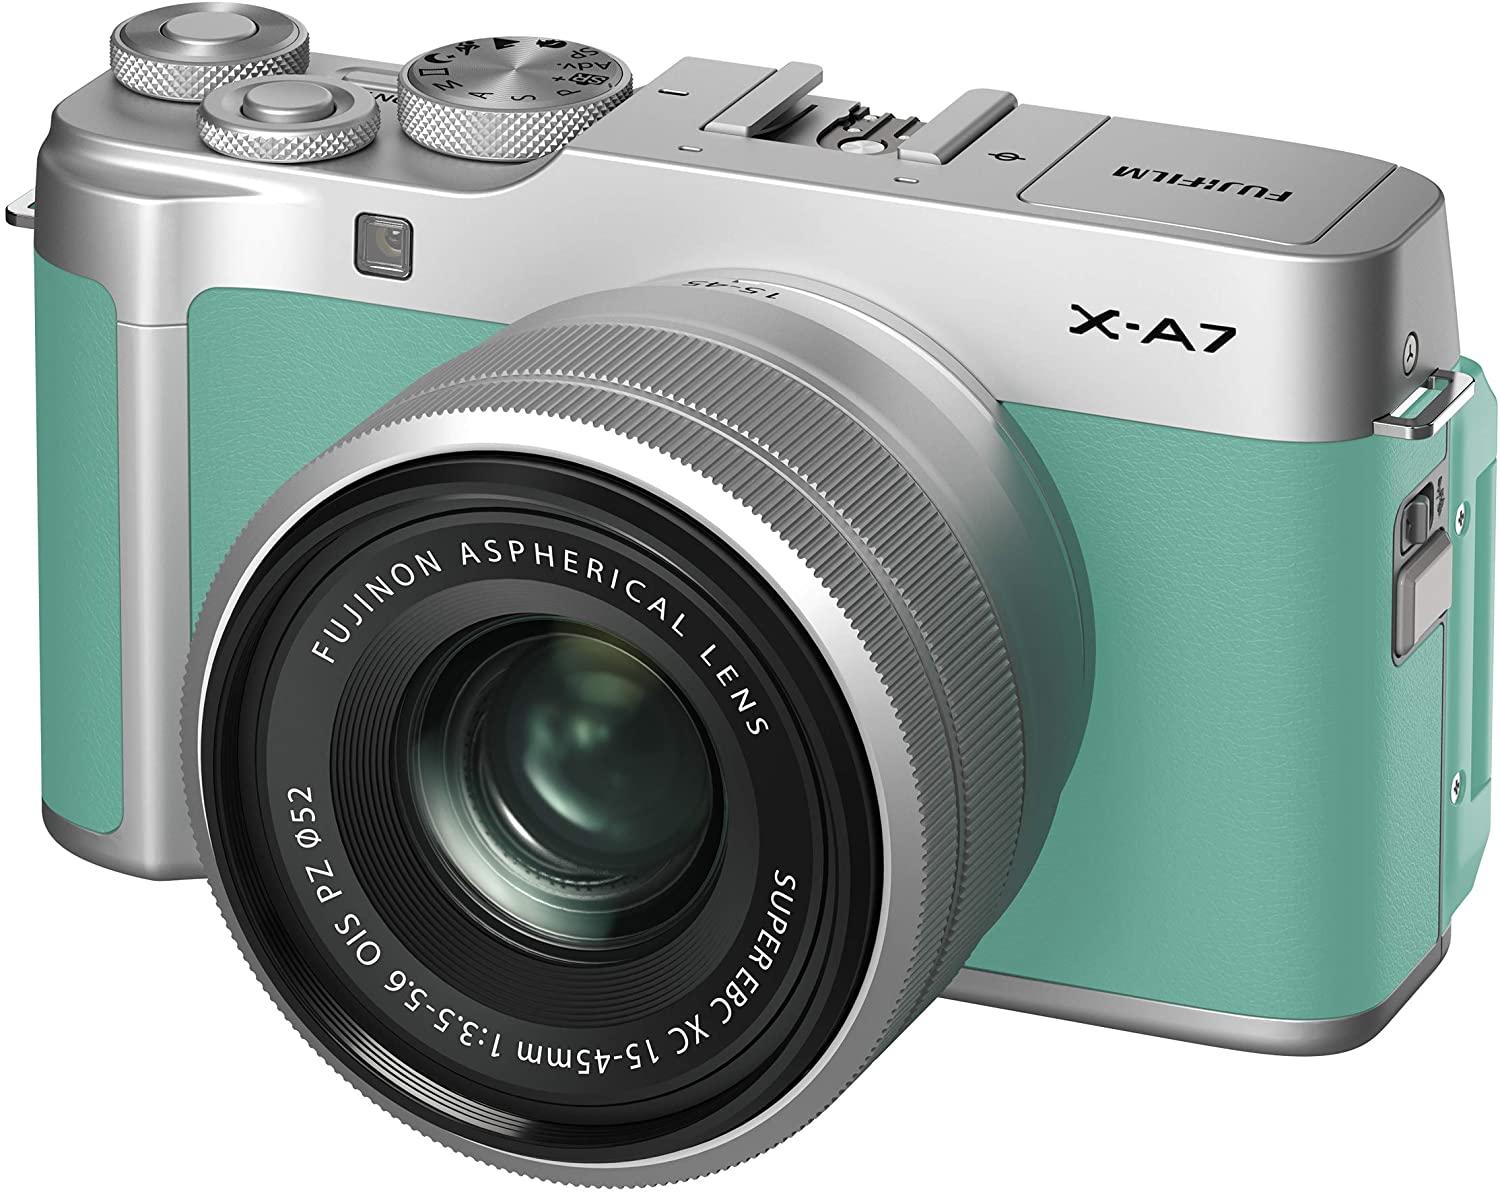 Fujifilm X-A7 Mirrorless Digital Camera with 15-45mm Lens for $450 Shipped